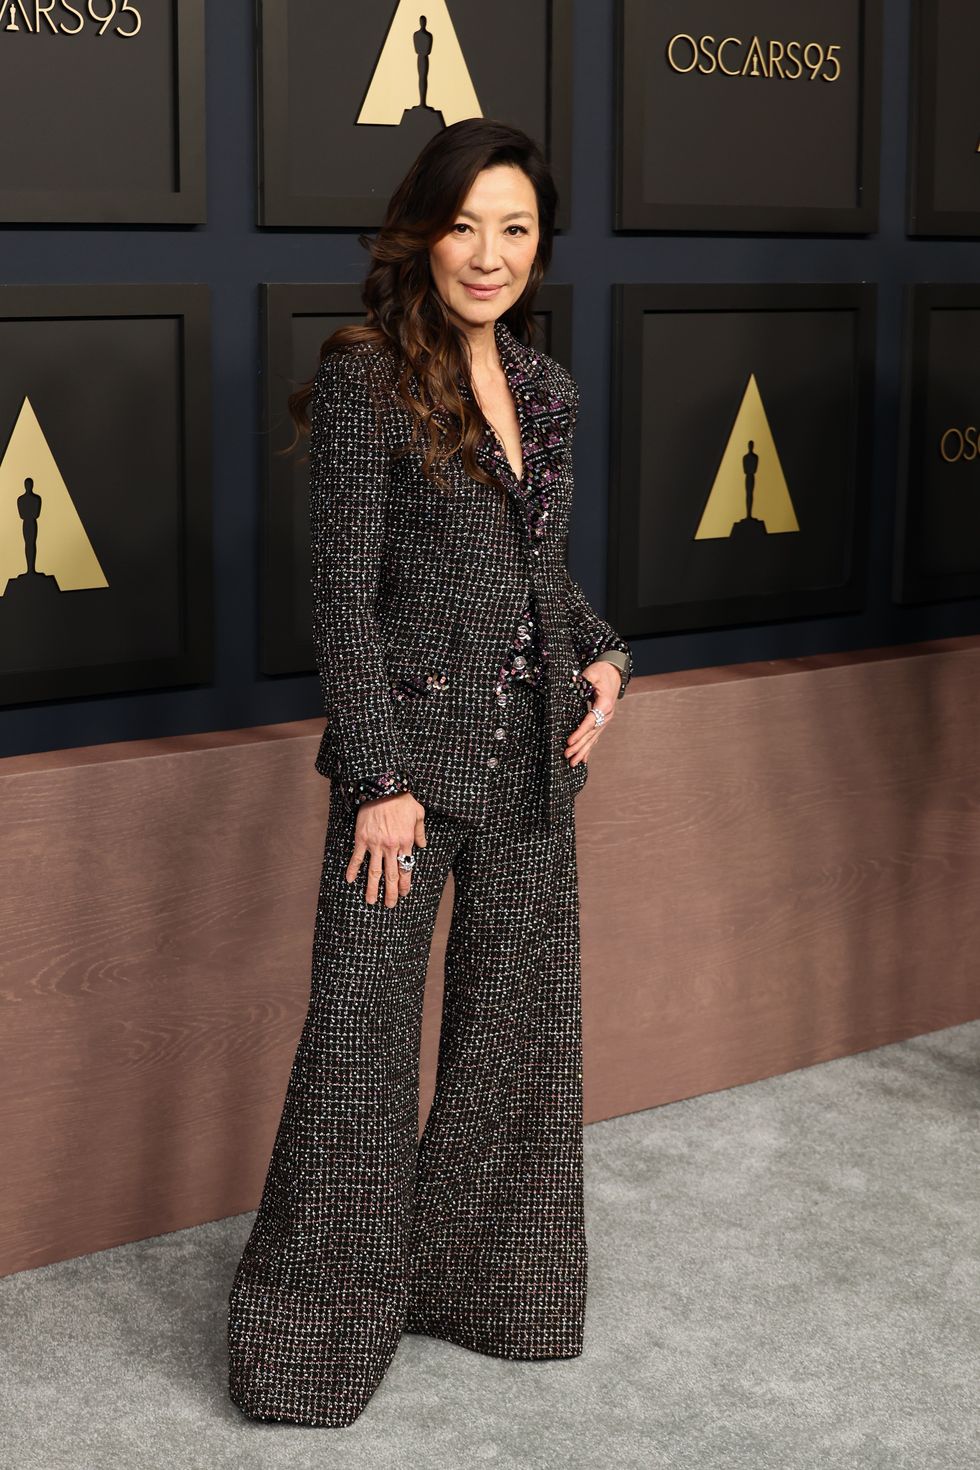 Oscars 2023: The best red carpet looks, from Michelle Yeoh to